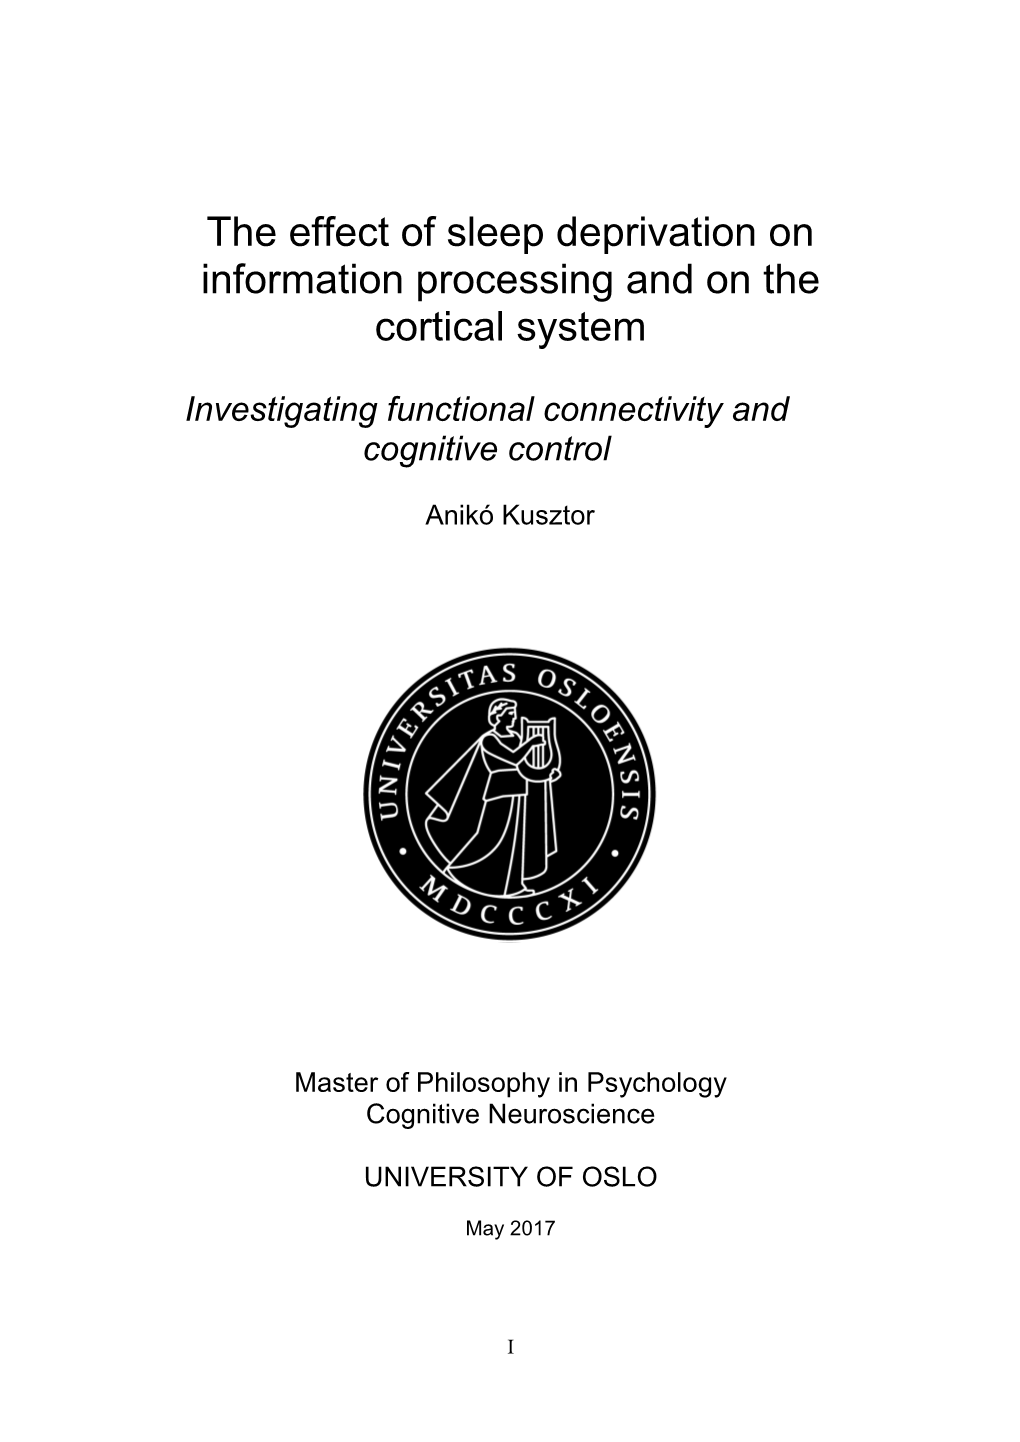 The Effect of Sleep Deprivation on Information Processing and on the Cortical System